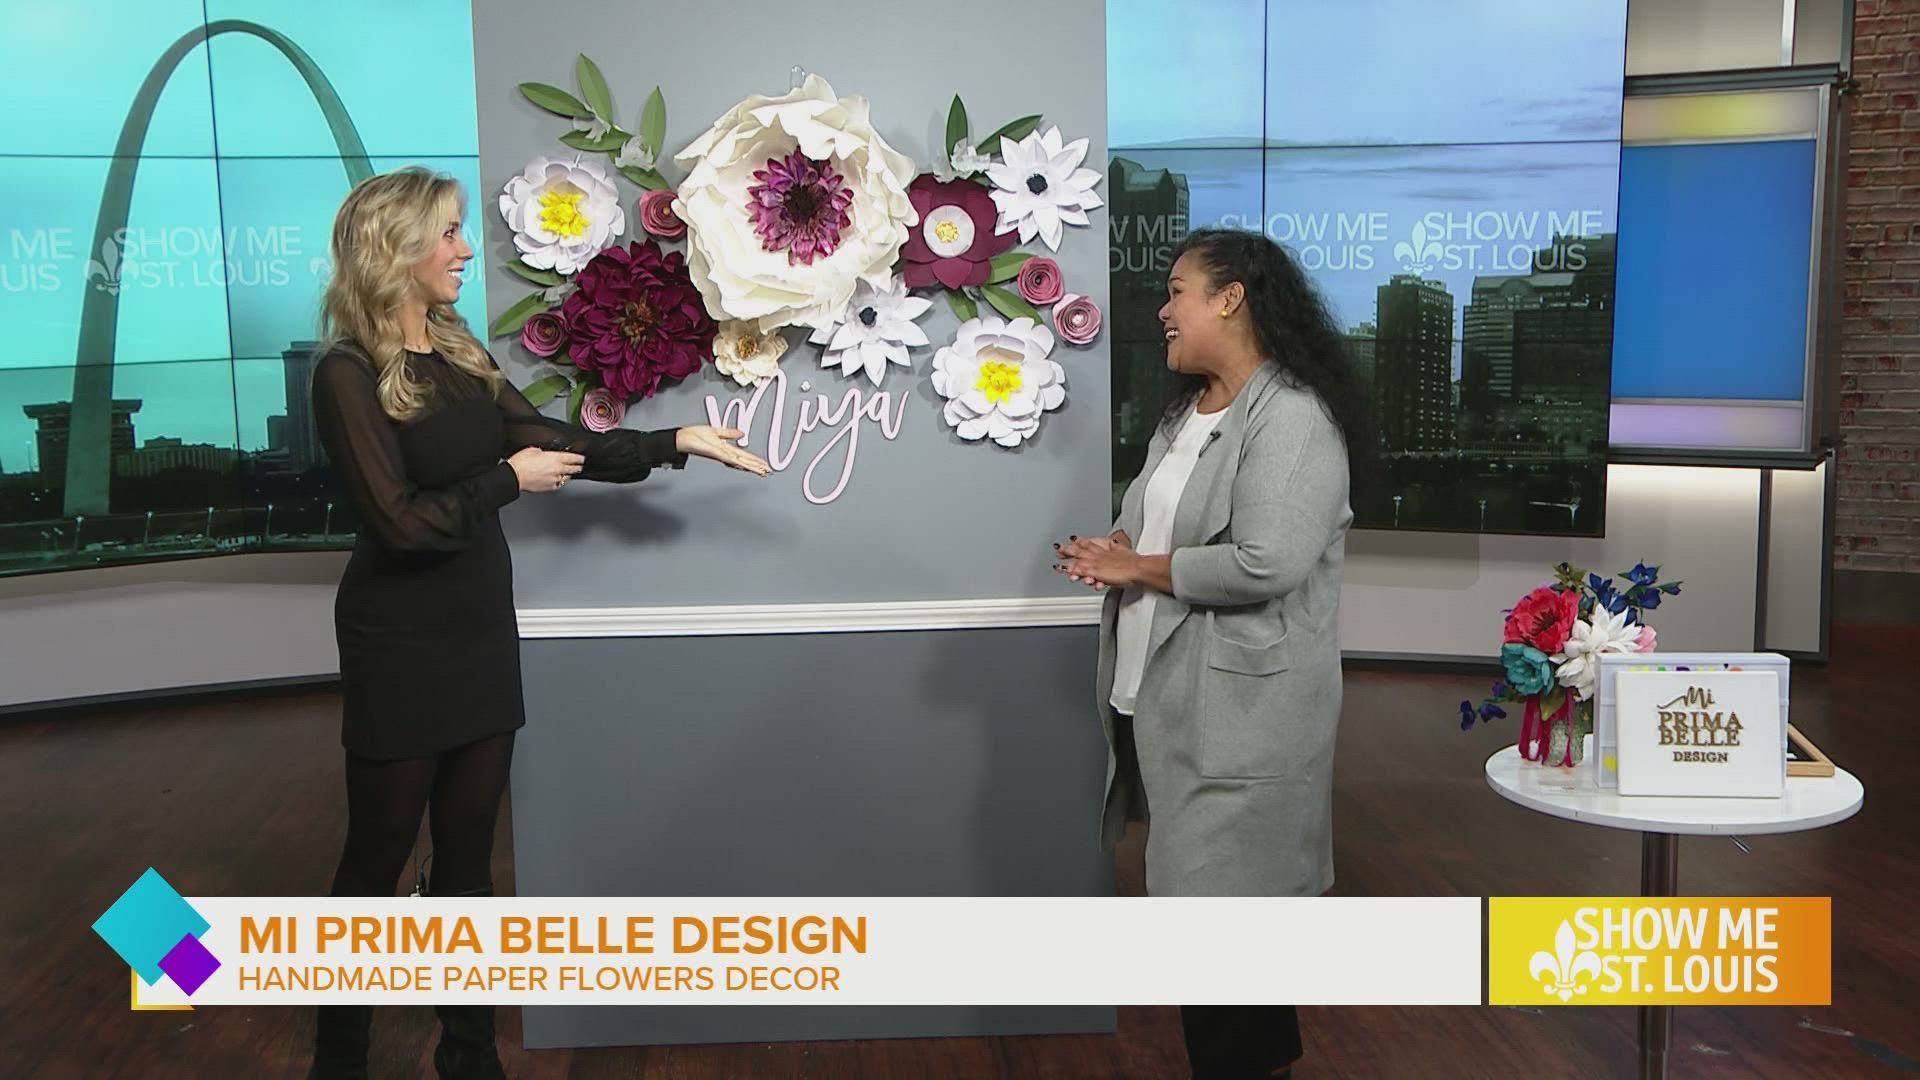 This winter, add some joy throughout your home! Mi Prima Belle Design specializes in handmade paper flower décor.